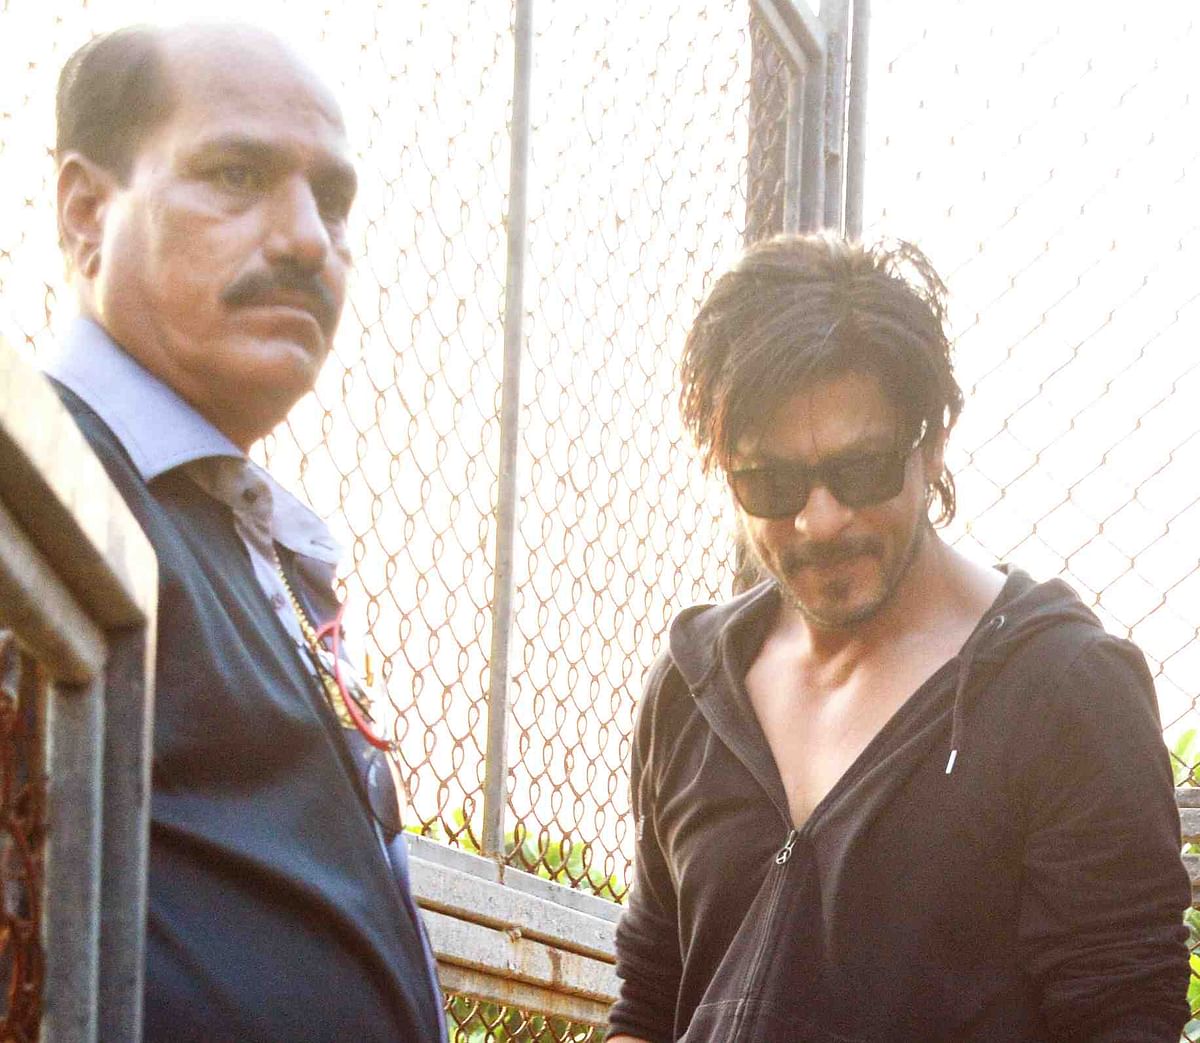 Shah Rukh Khan’s spot boy of 25 years Subhash passed away over the weekend